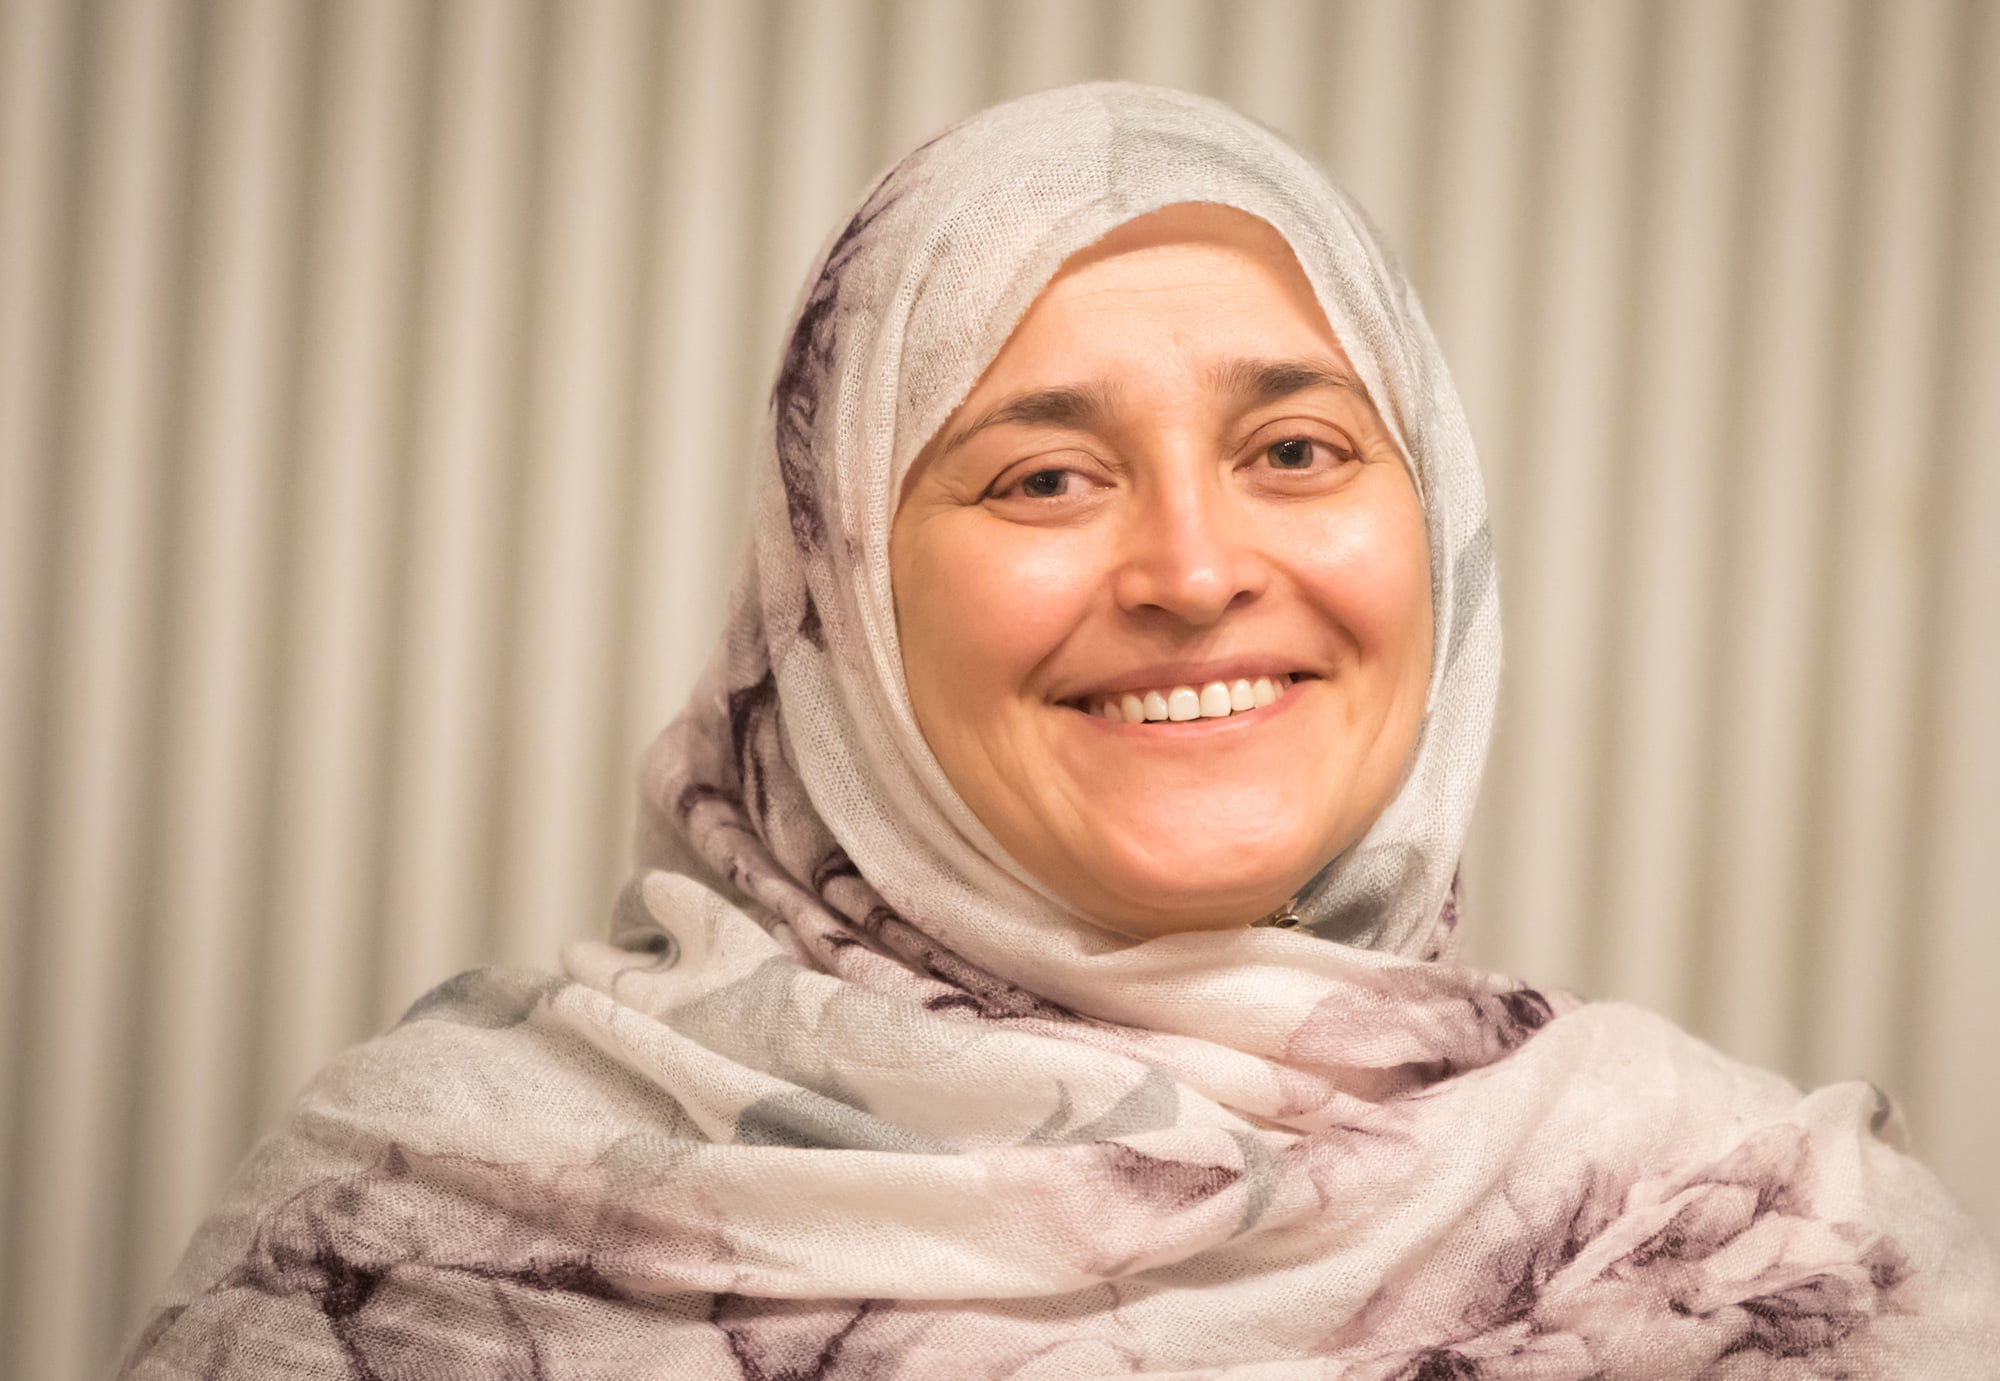 Jamila Afghani, NGO NECDO founder, and Aurora Prize winner smiles broadly in a traditional head scarf.